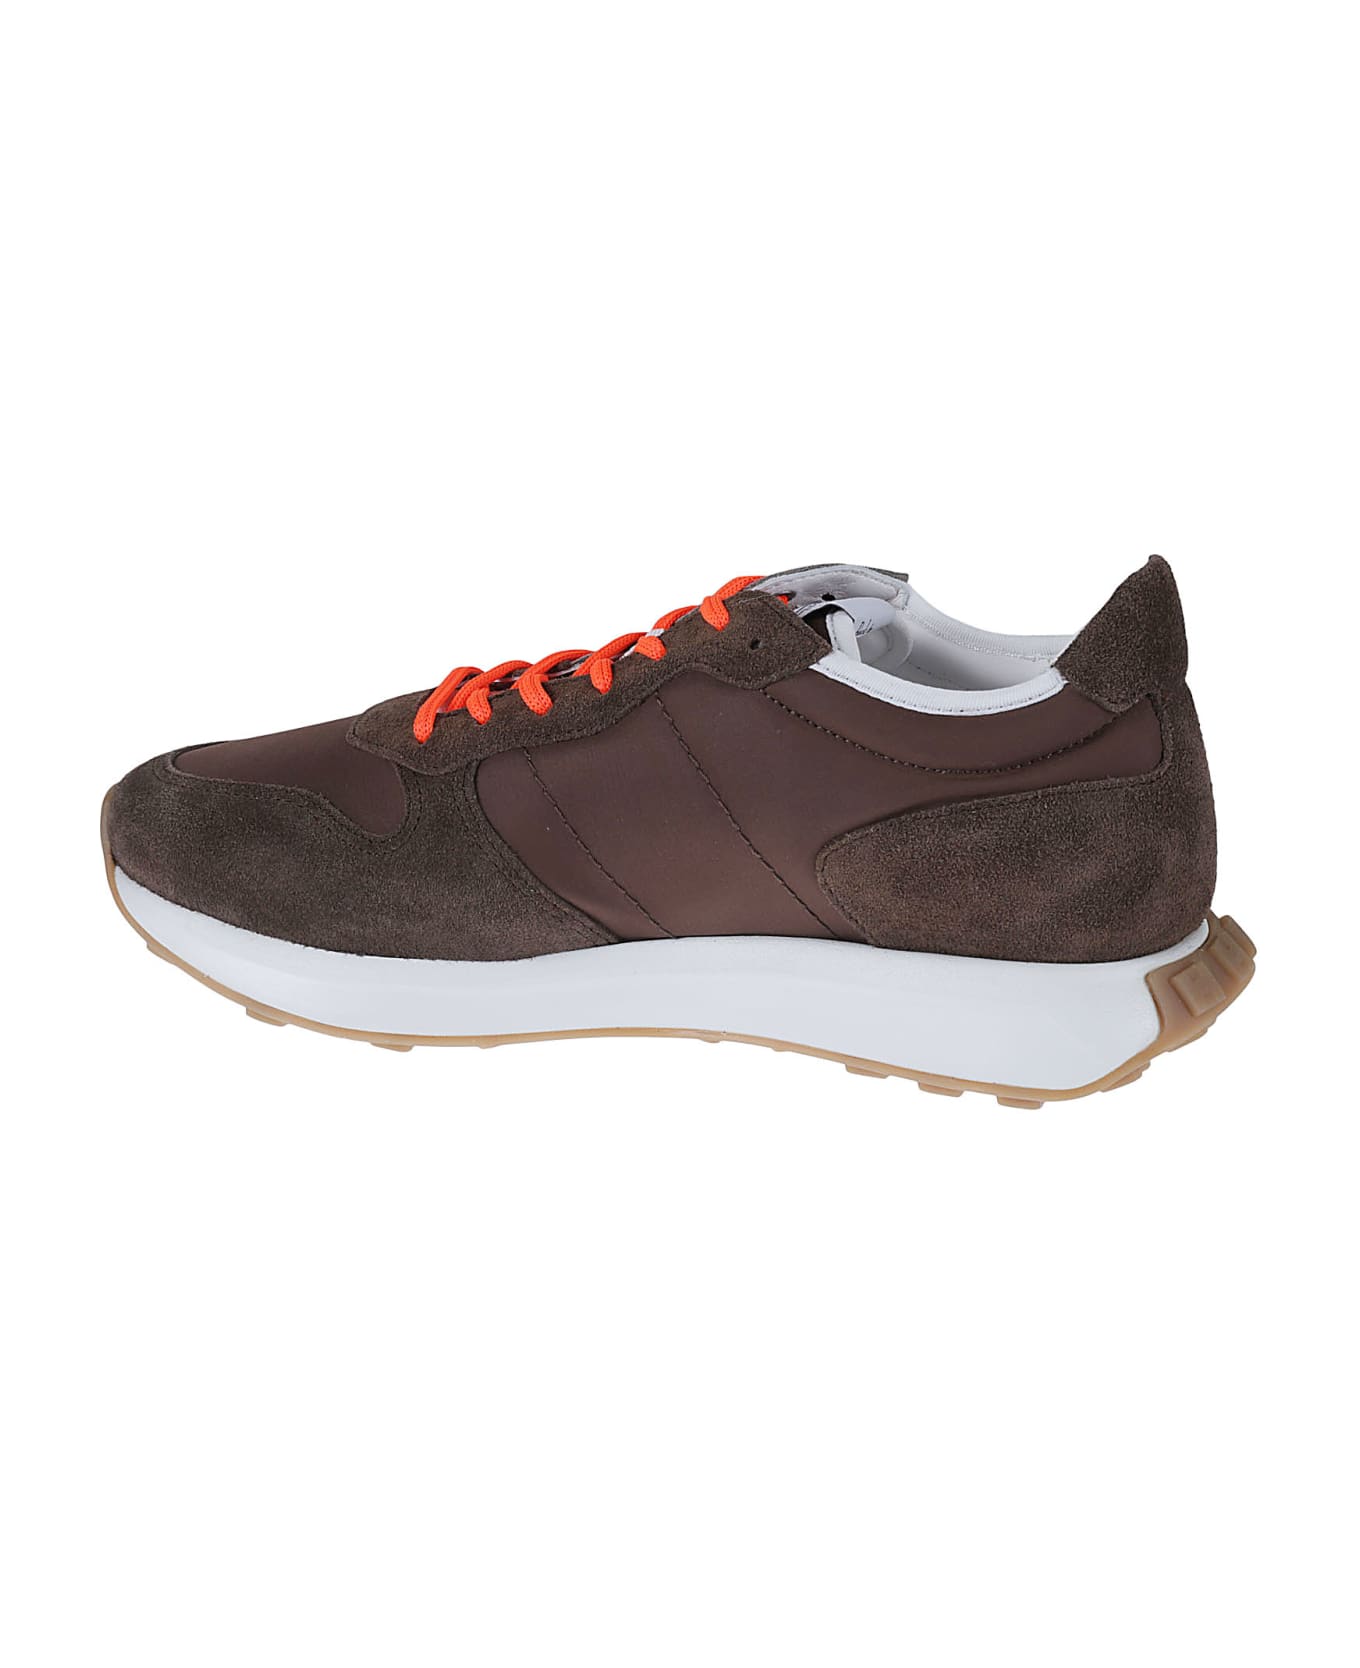 Hogan H601 Lace-up Sneakers - Chocolate